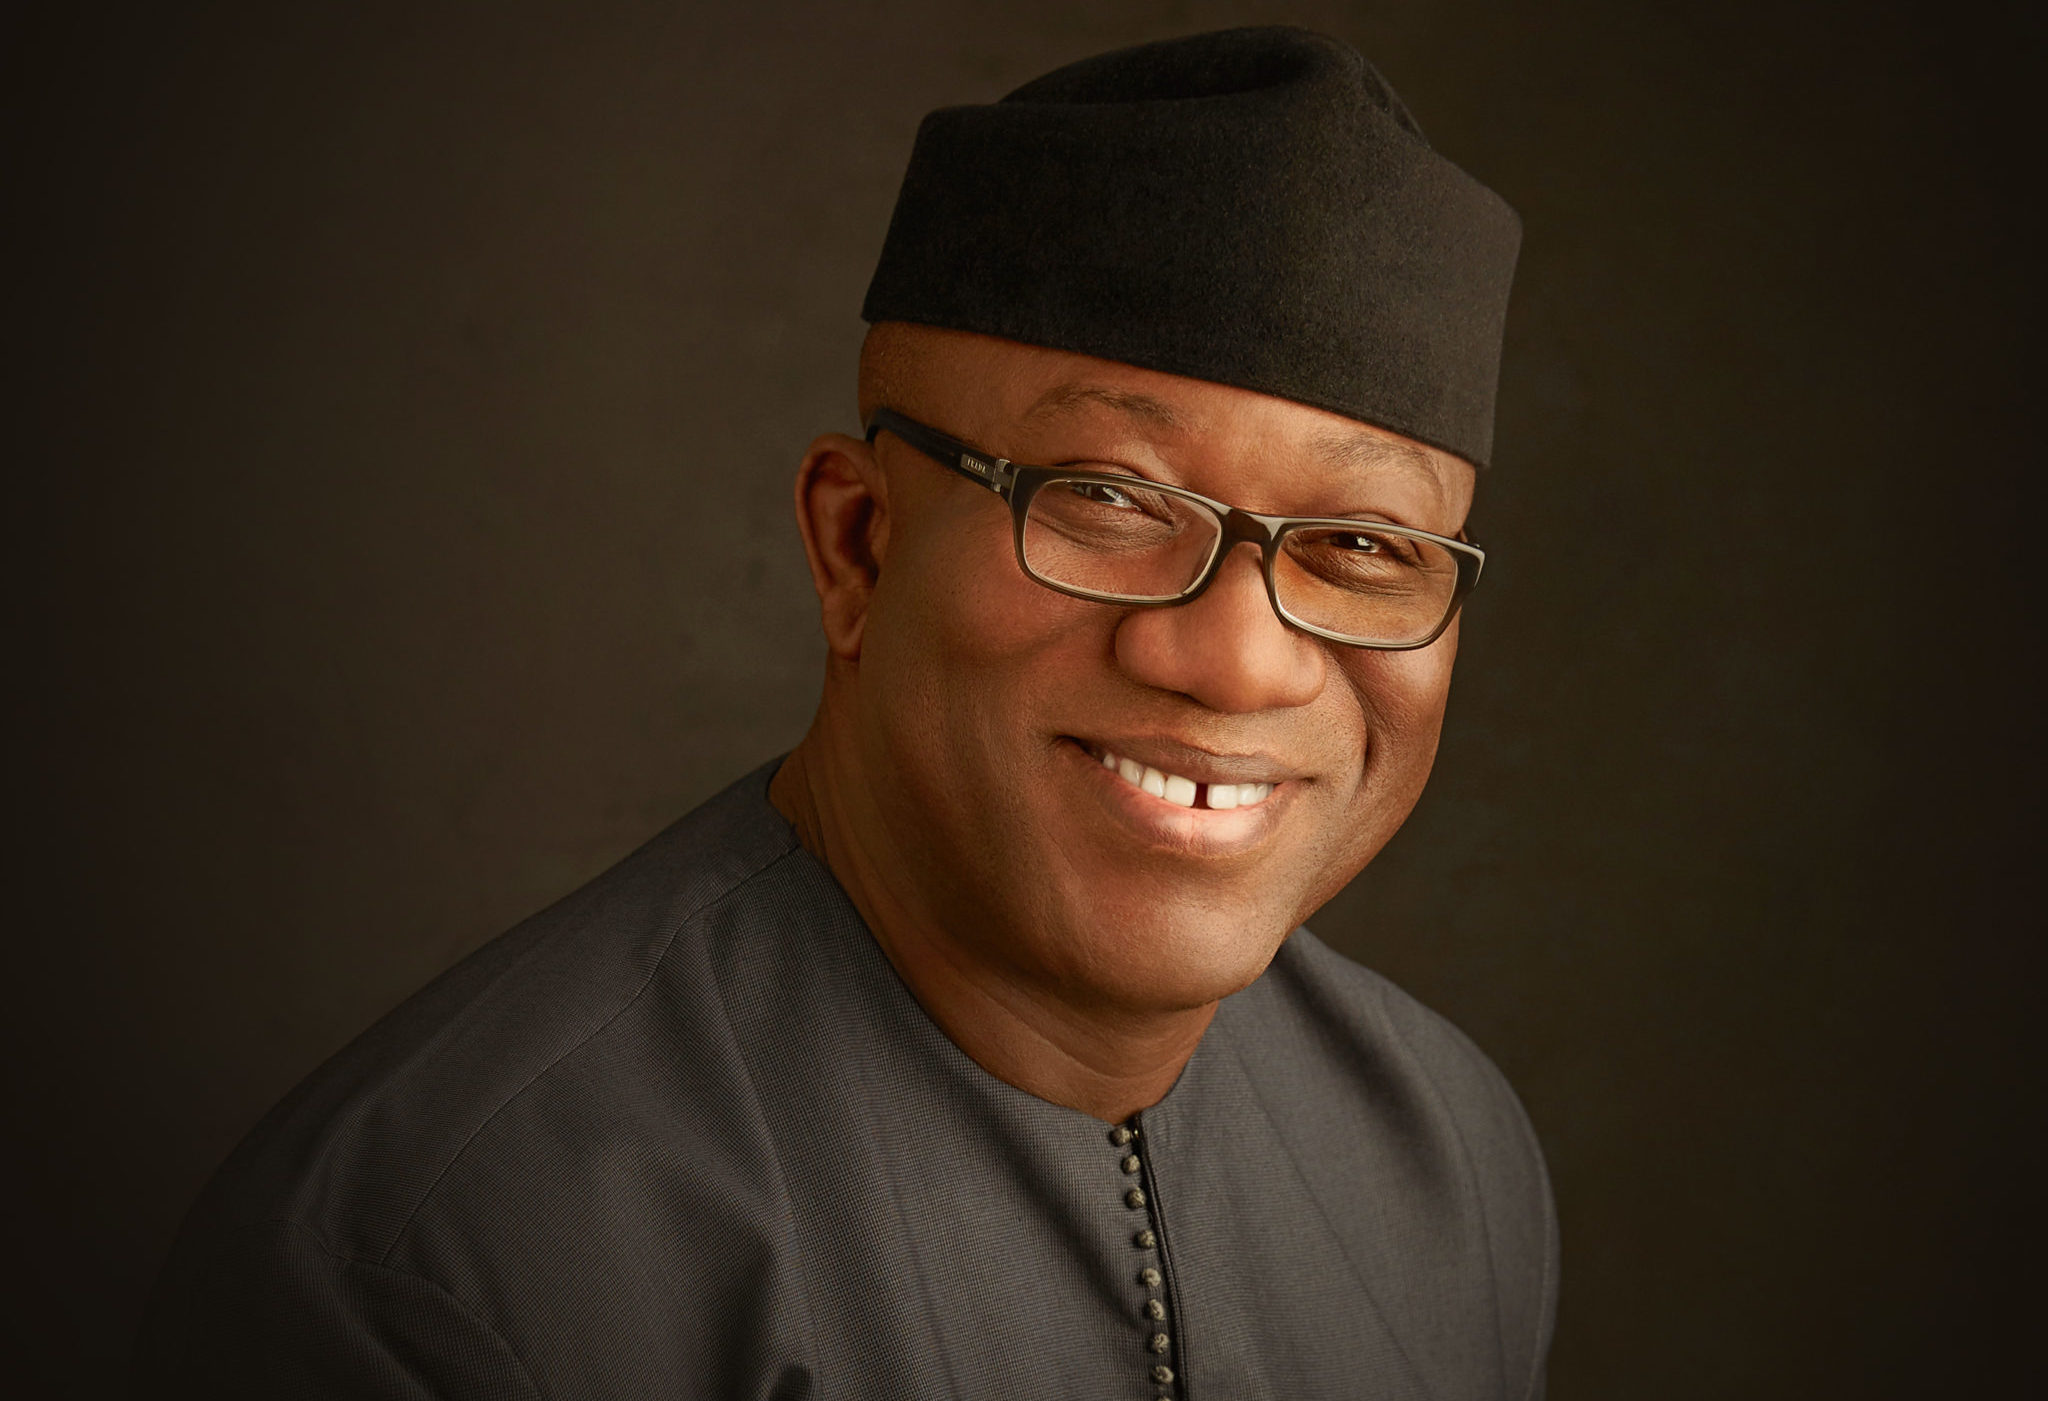 Kayode Fayemi writes about his candidacy for the president of Nigeria.